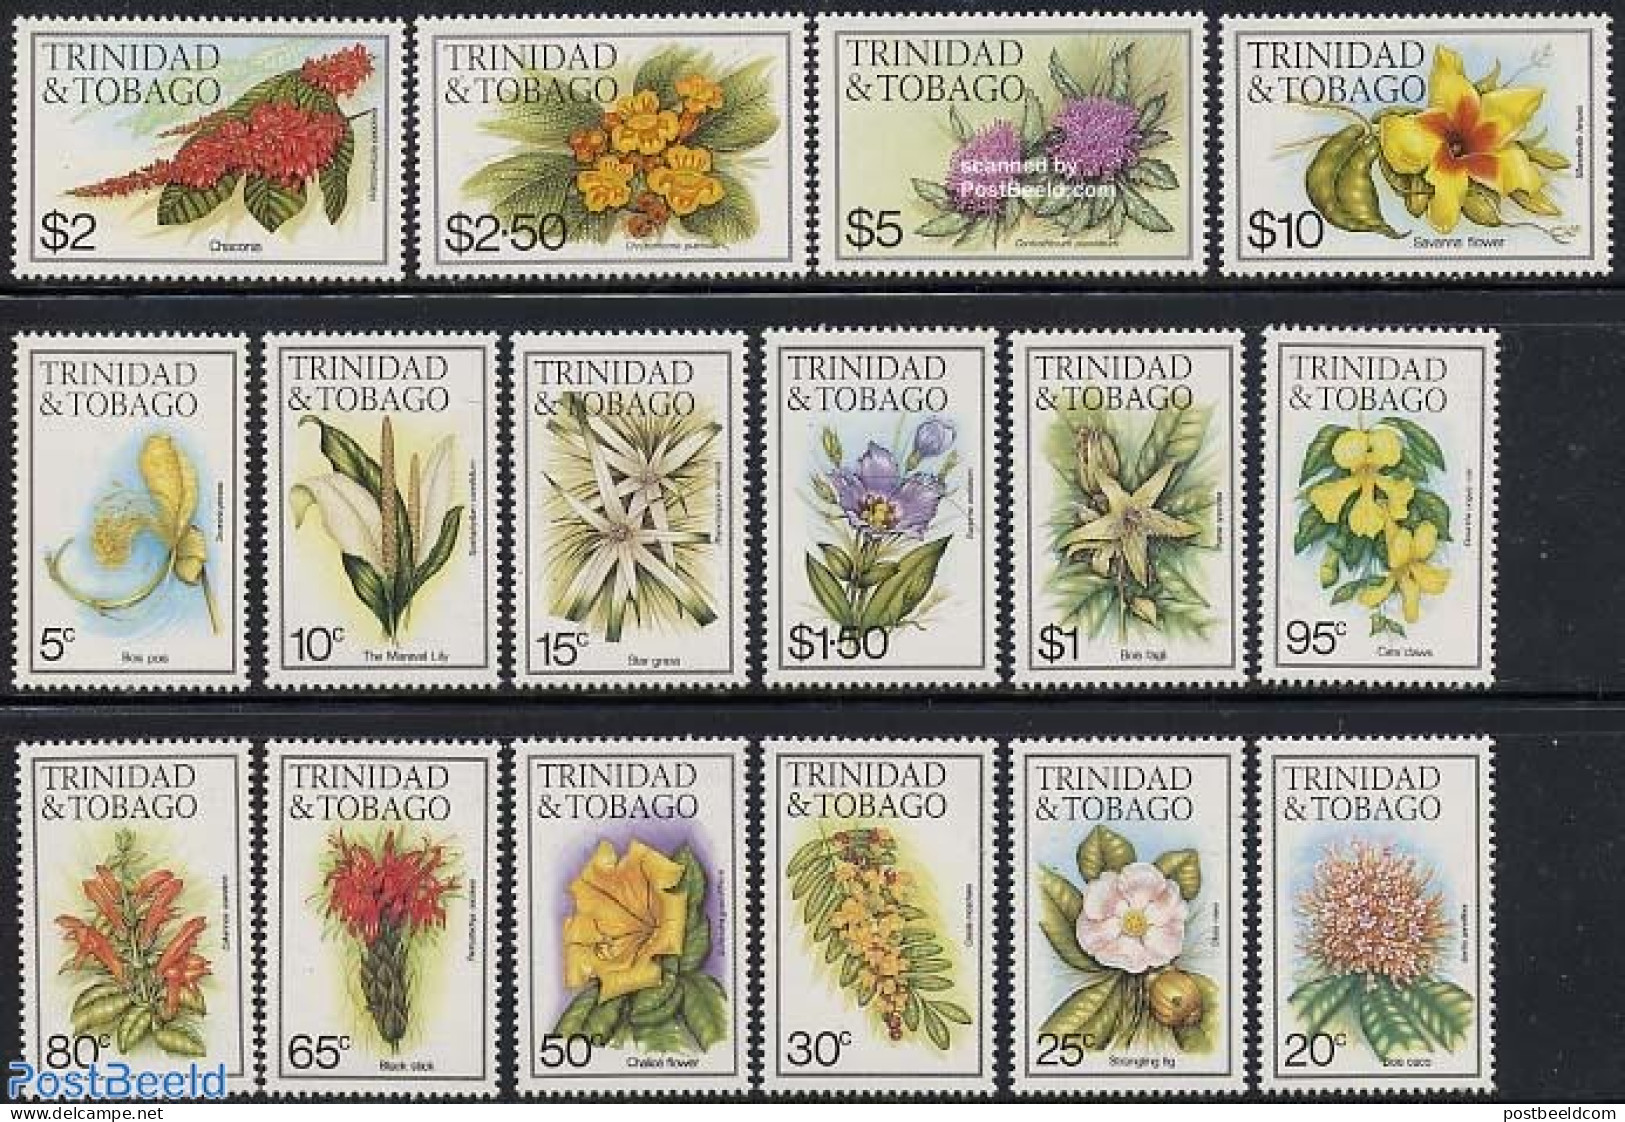 Trinidad & Tobago 1983 Definitives, Flowers 16v (without Year), Mint NH, Nature - Flowers & Plants - Trinité & Tobago (1962-...)